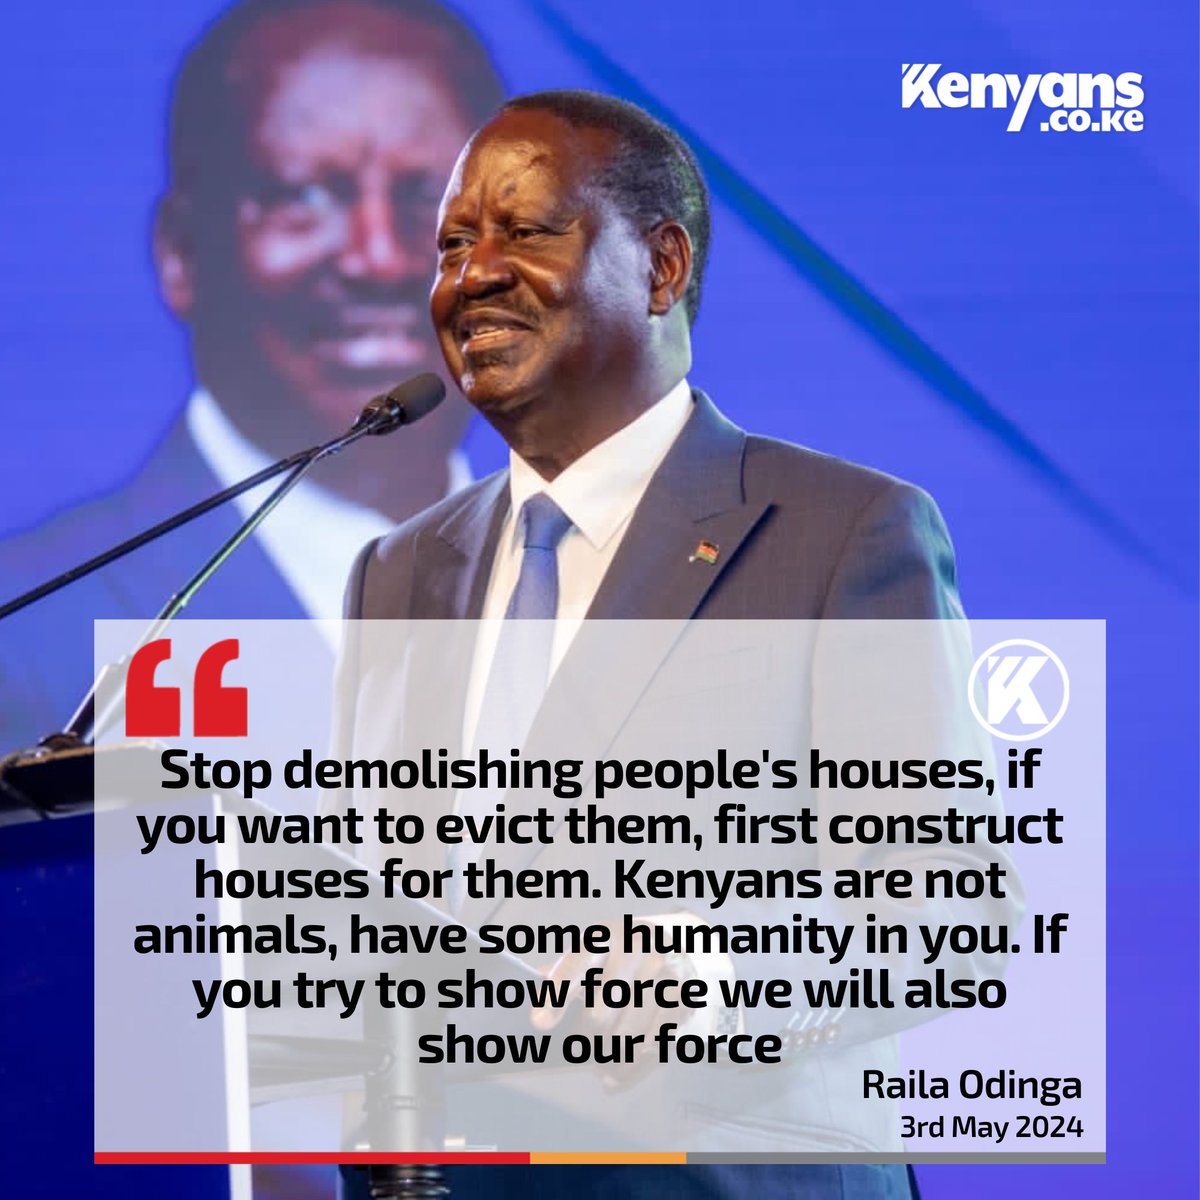 Stop demolishing people's houses, if you want to evict them, first construct houses for them - Raila Odinga